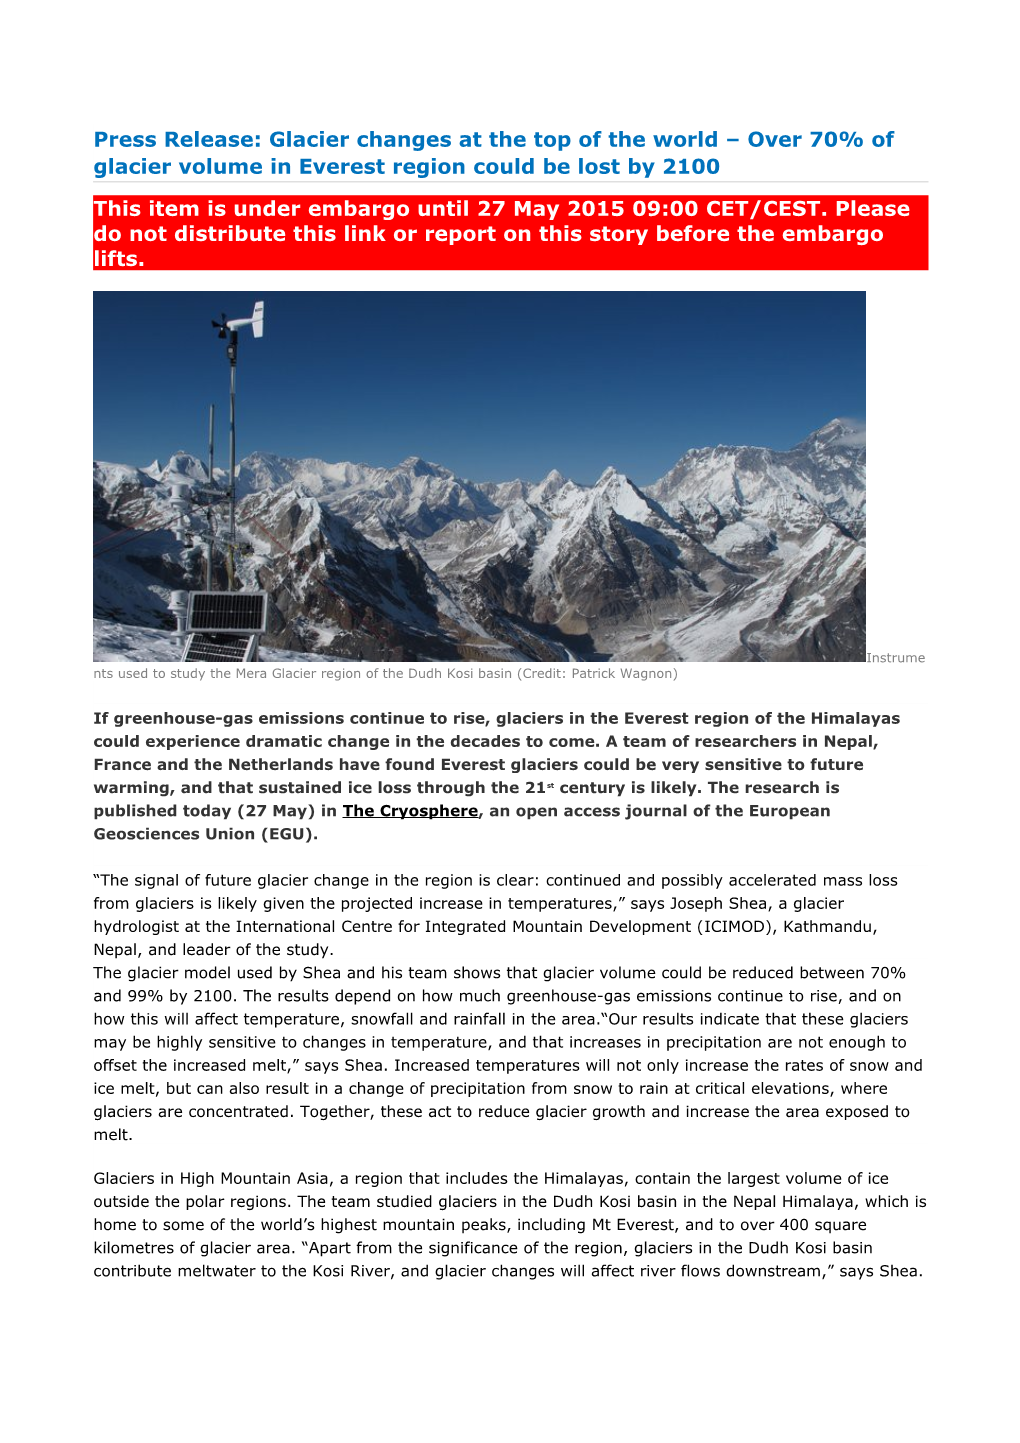 Press Release: Glacier Changes at the Top of the World Over 70% of Glacier Volume in Everest